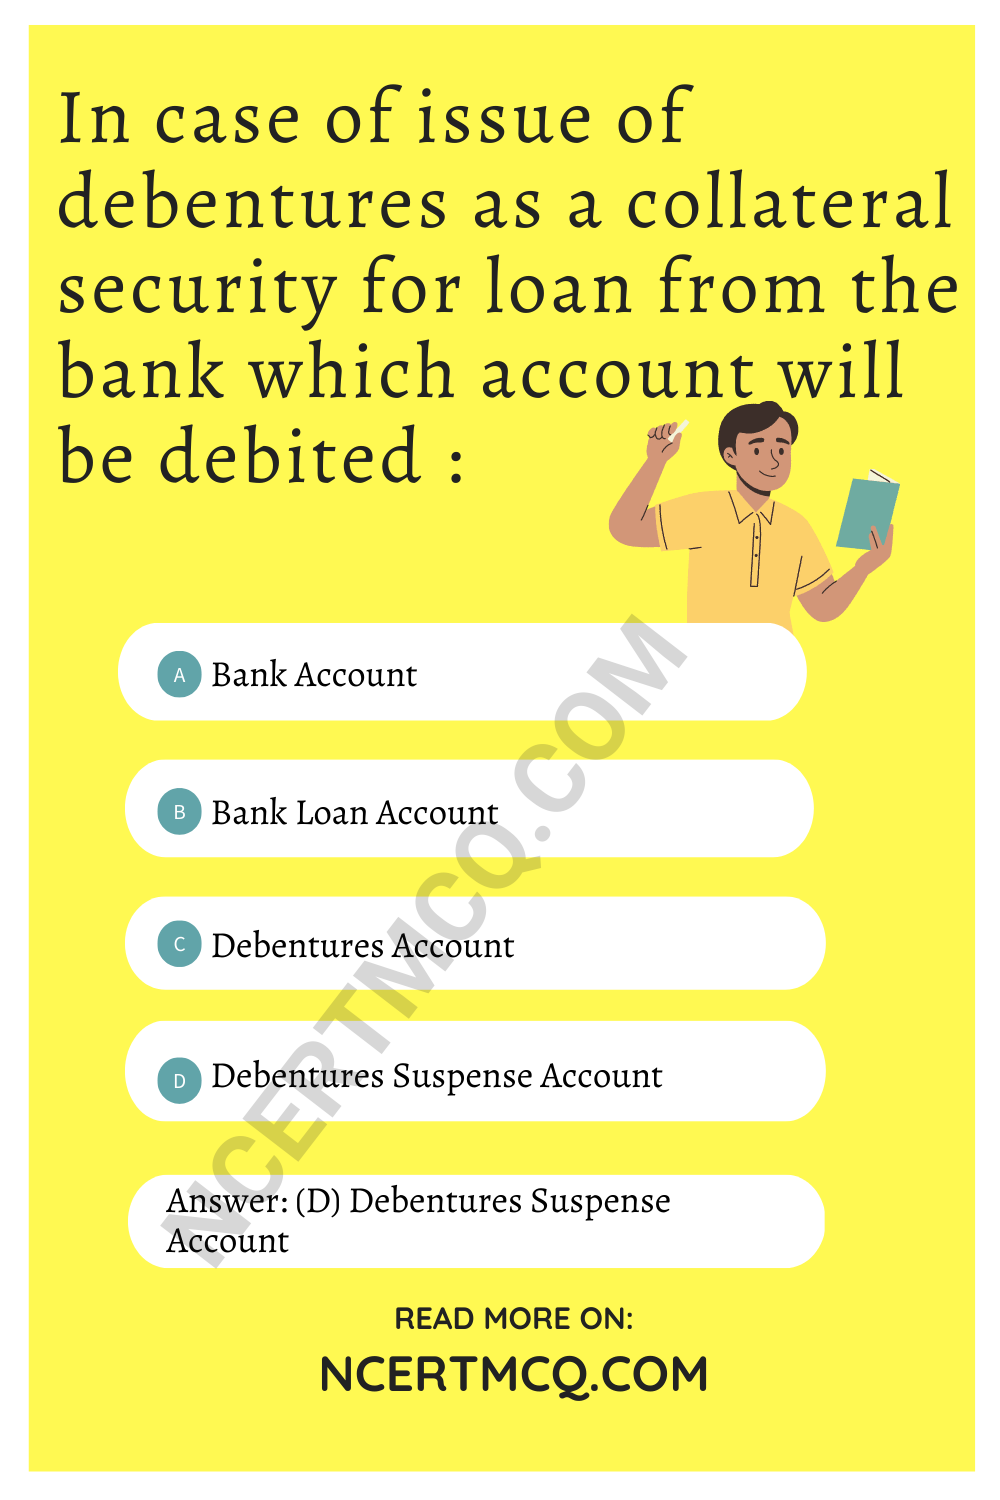 In case of issue of debentures as a collateral security for loan from the bank which account will be debited :